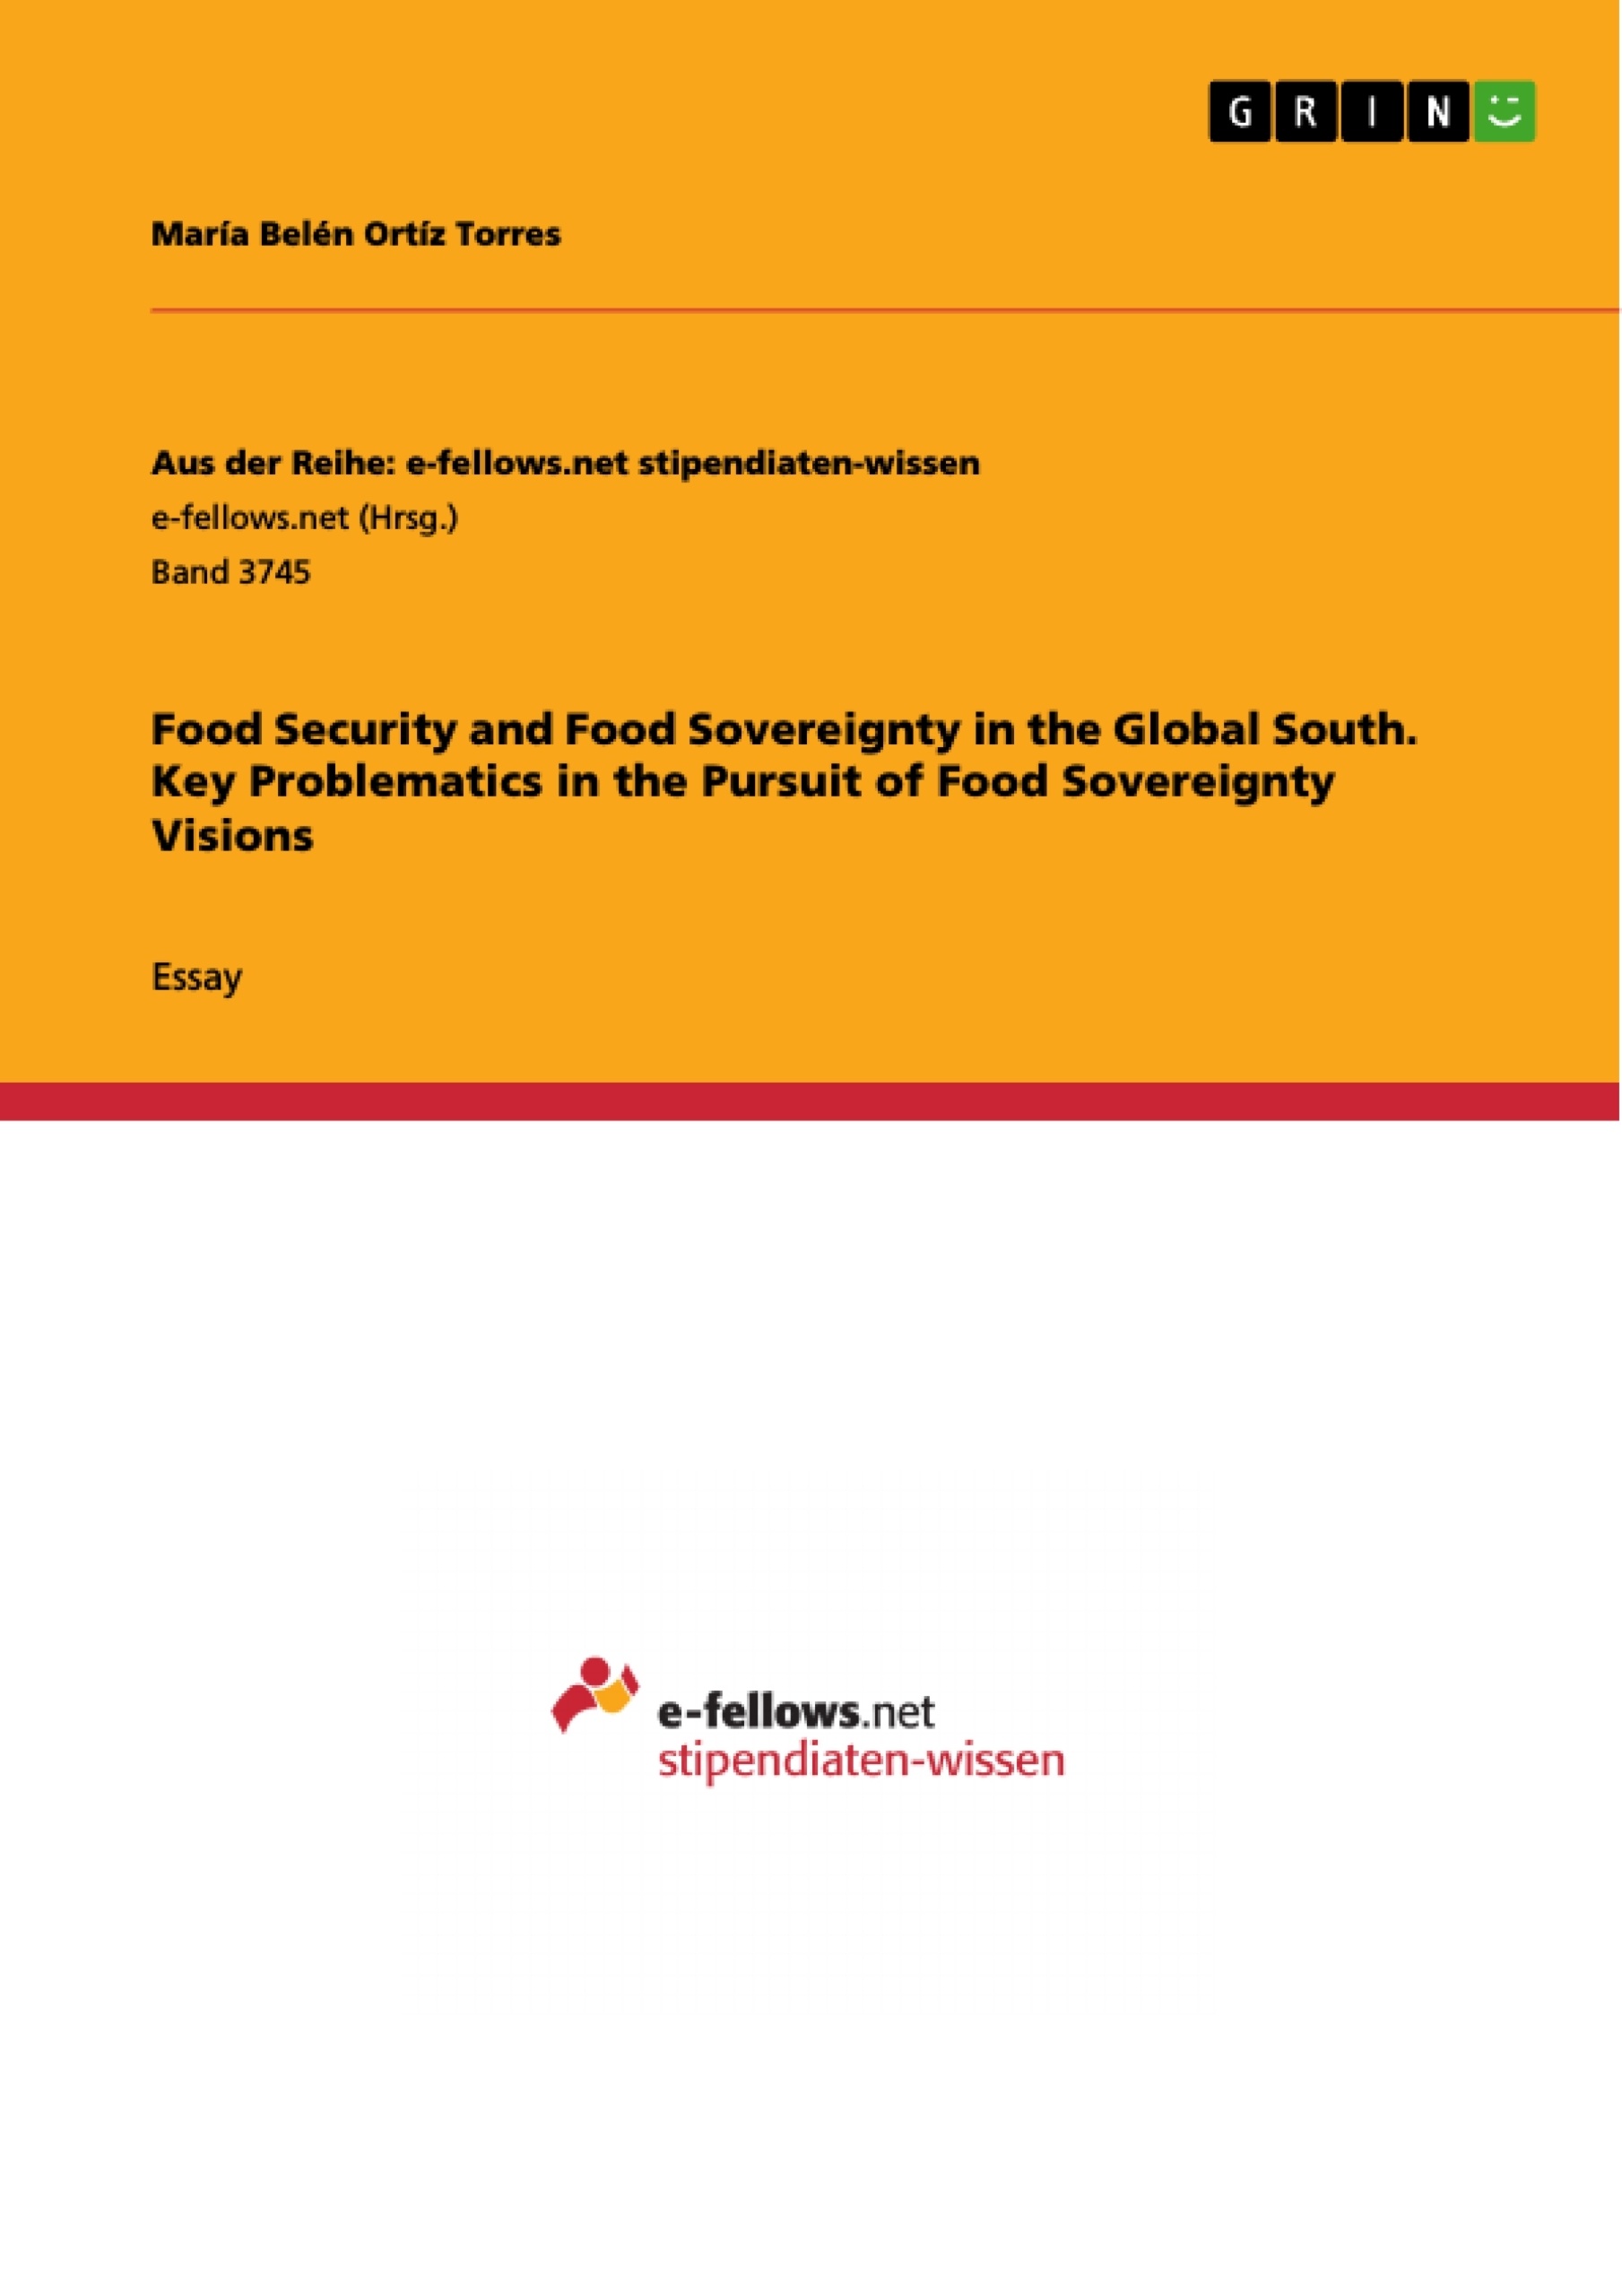 Título: Food Security and Food Sovereignty in the Global South. Key Problematics in the Pursuit of Food Sovereignty Visions